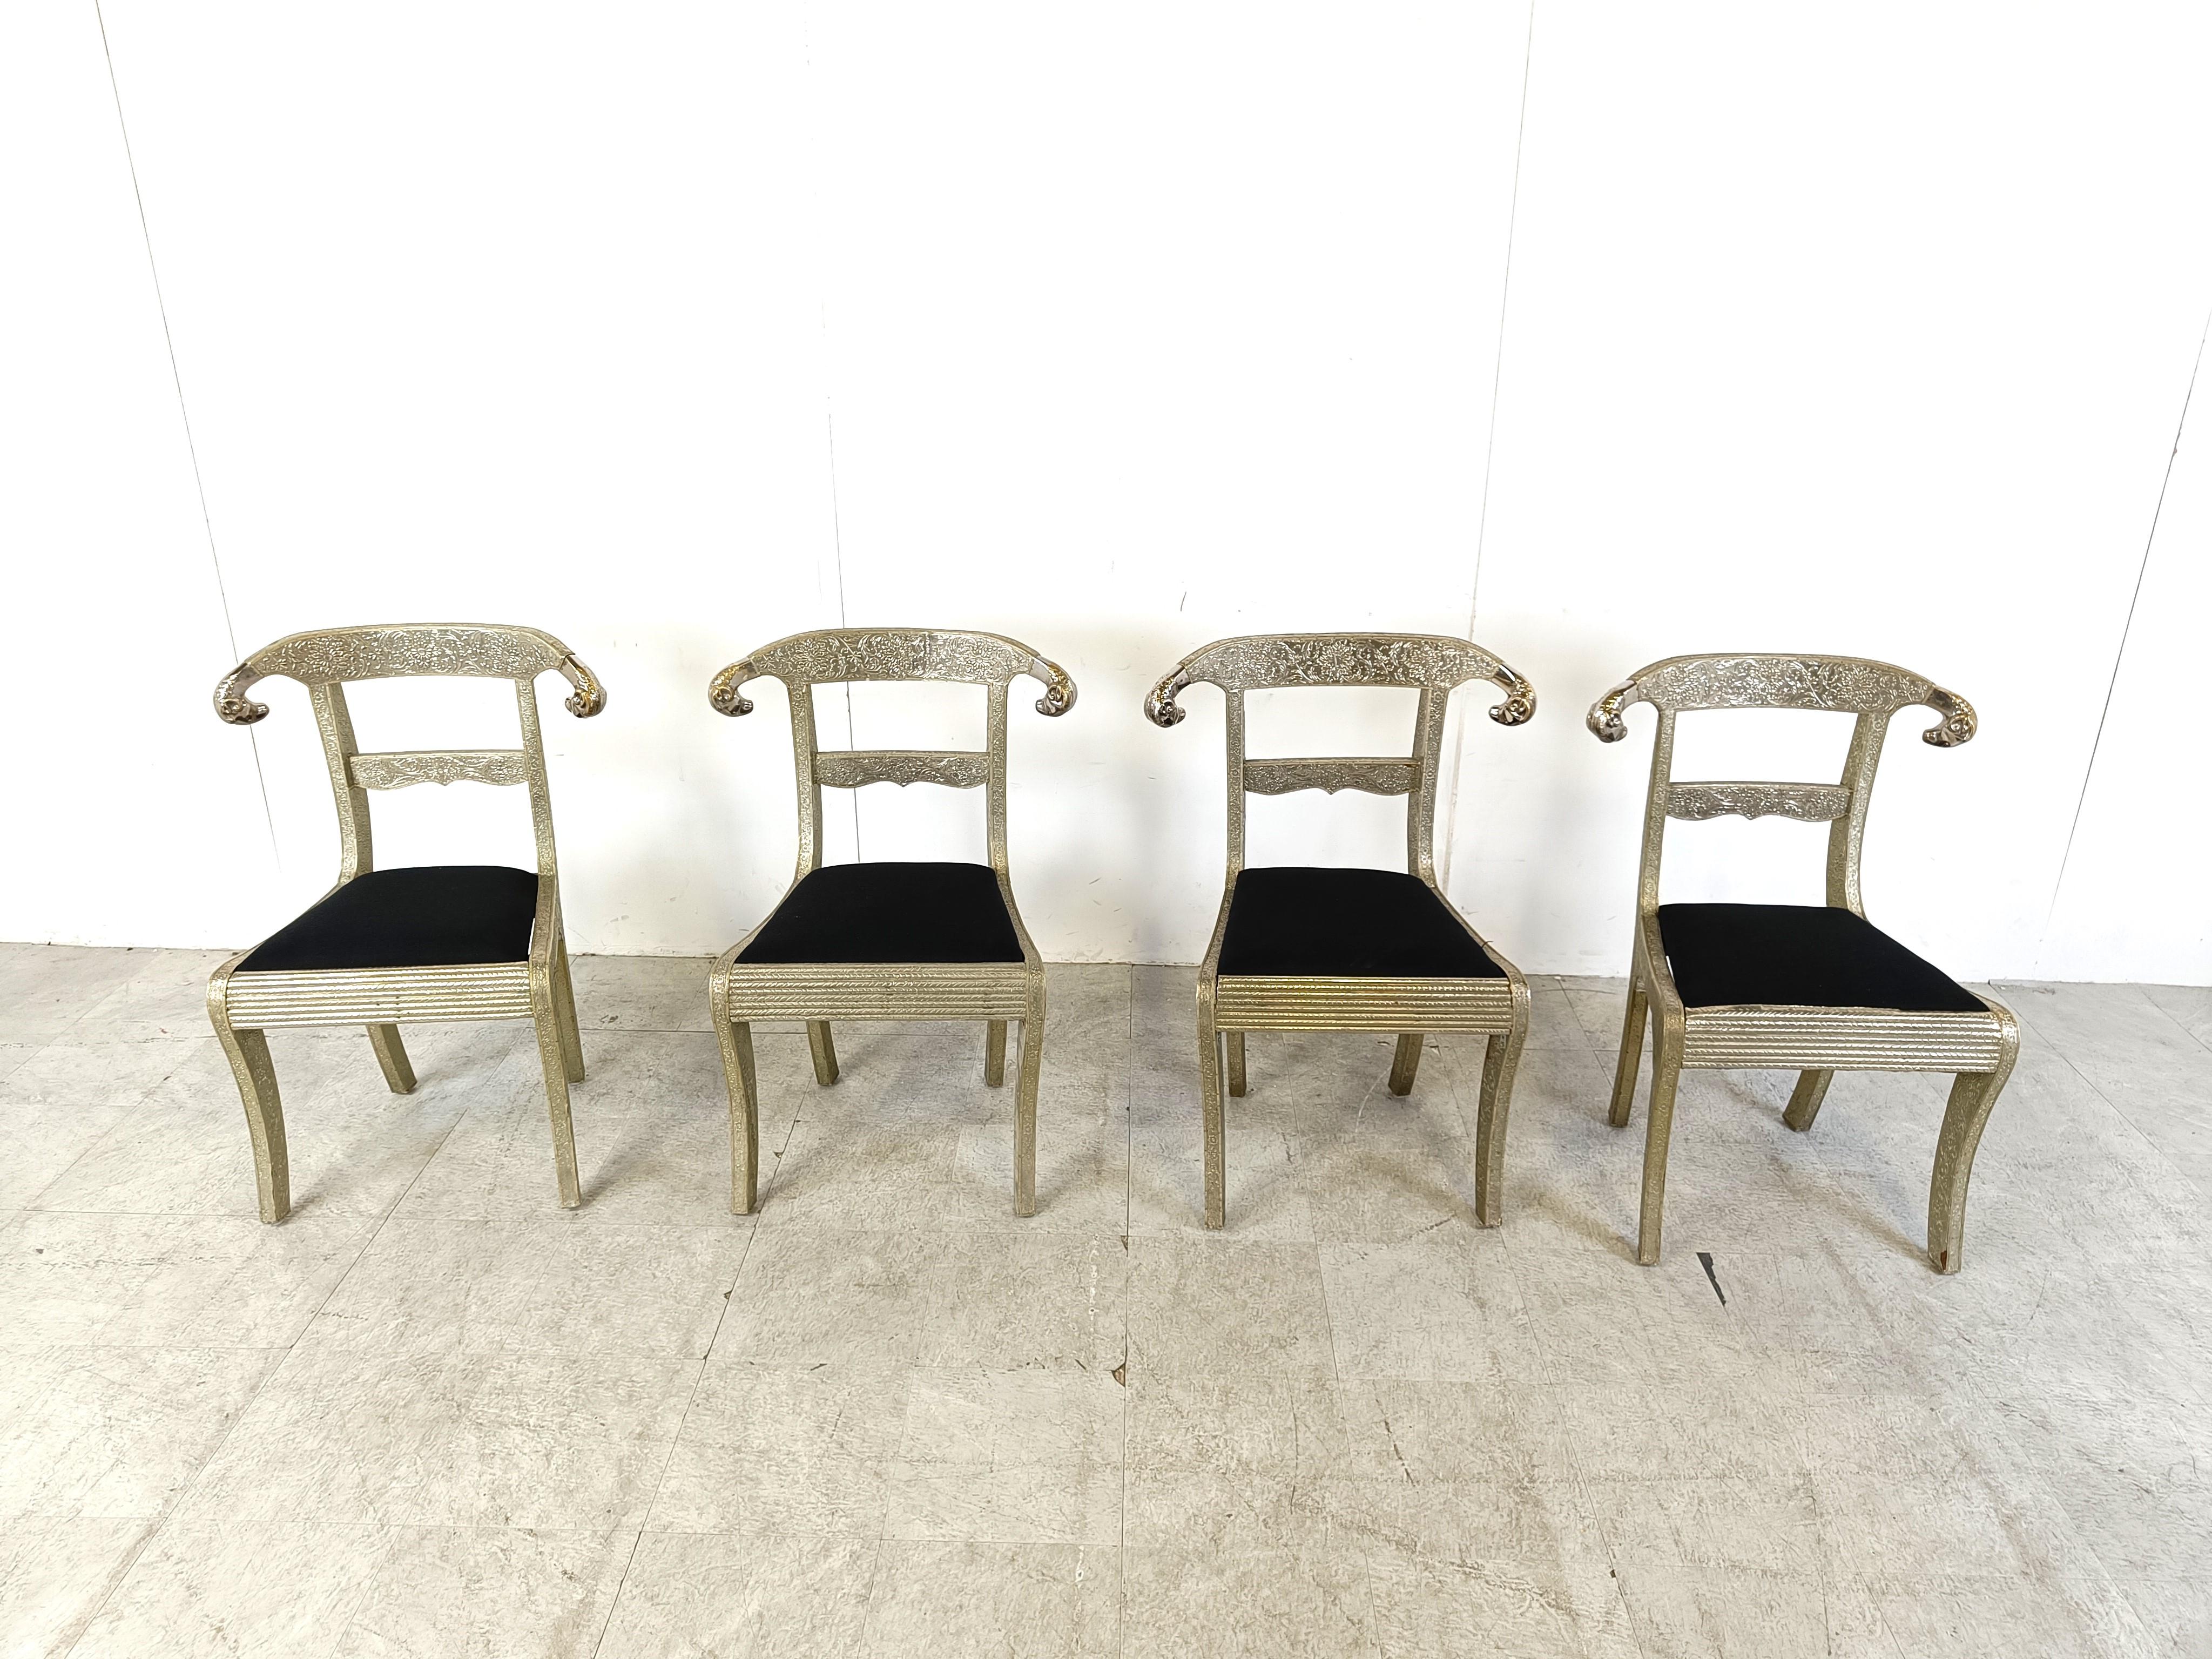 Set of 4 exquisite Anglo-Indian chairs.

These remarkable chairs are also known as an Indian Wedding Dowry Chairs.

They consist of a wooden frame covered with decorated silvered metal and two ram heads.

Newly upholstered in black fabric.

Such